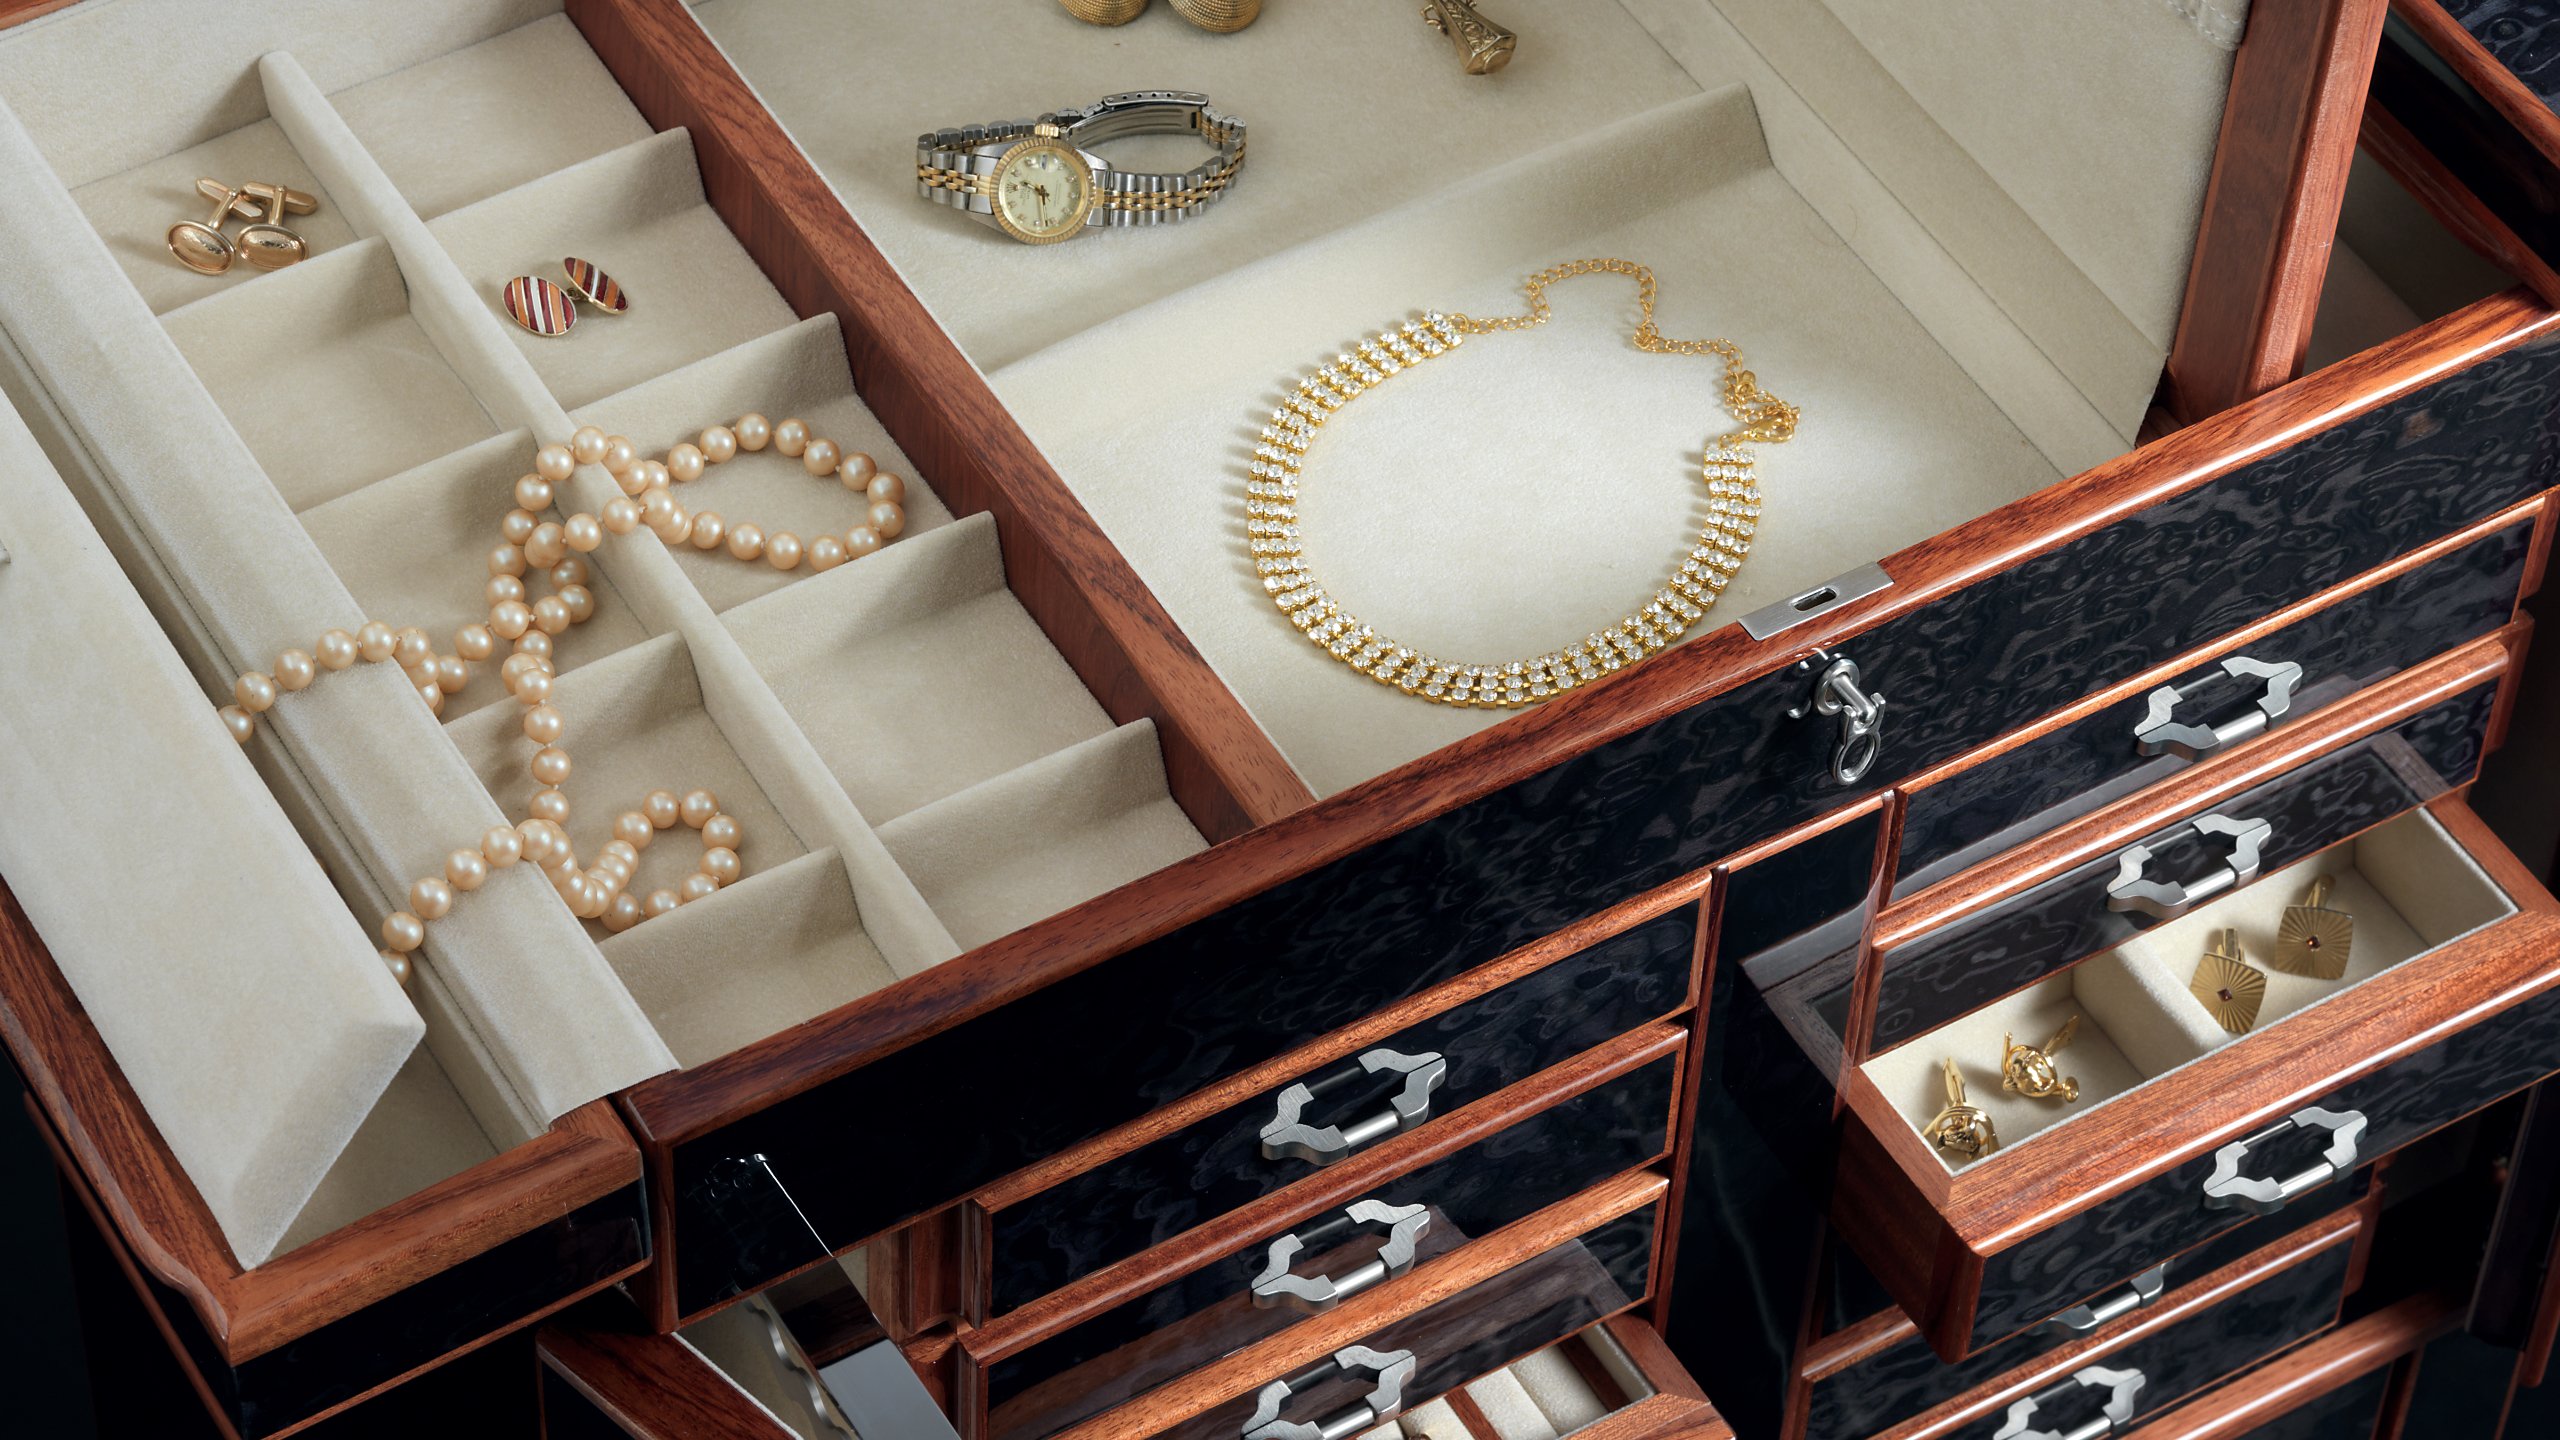 Luxury cabinets, boxes and chests